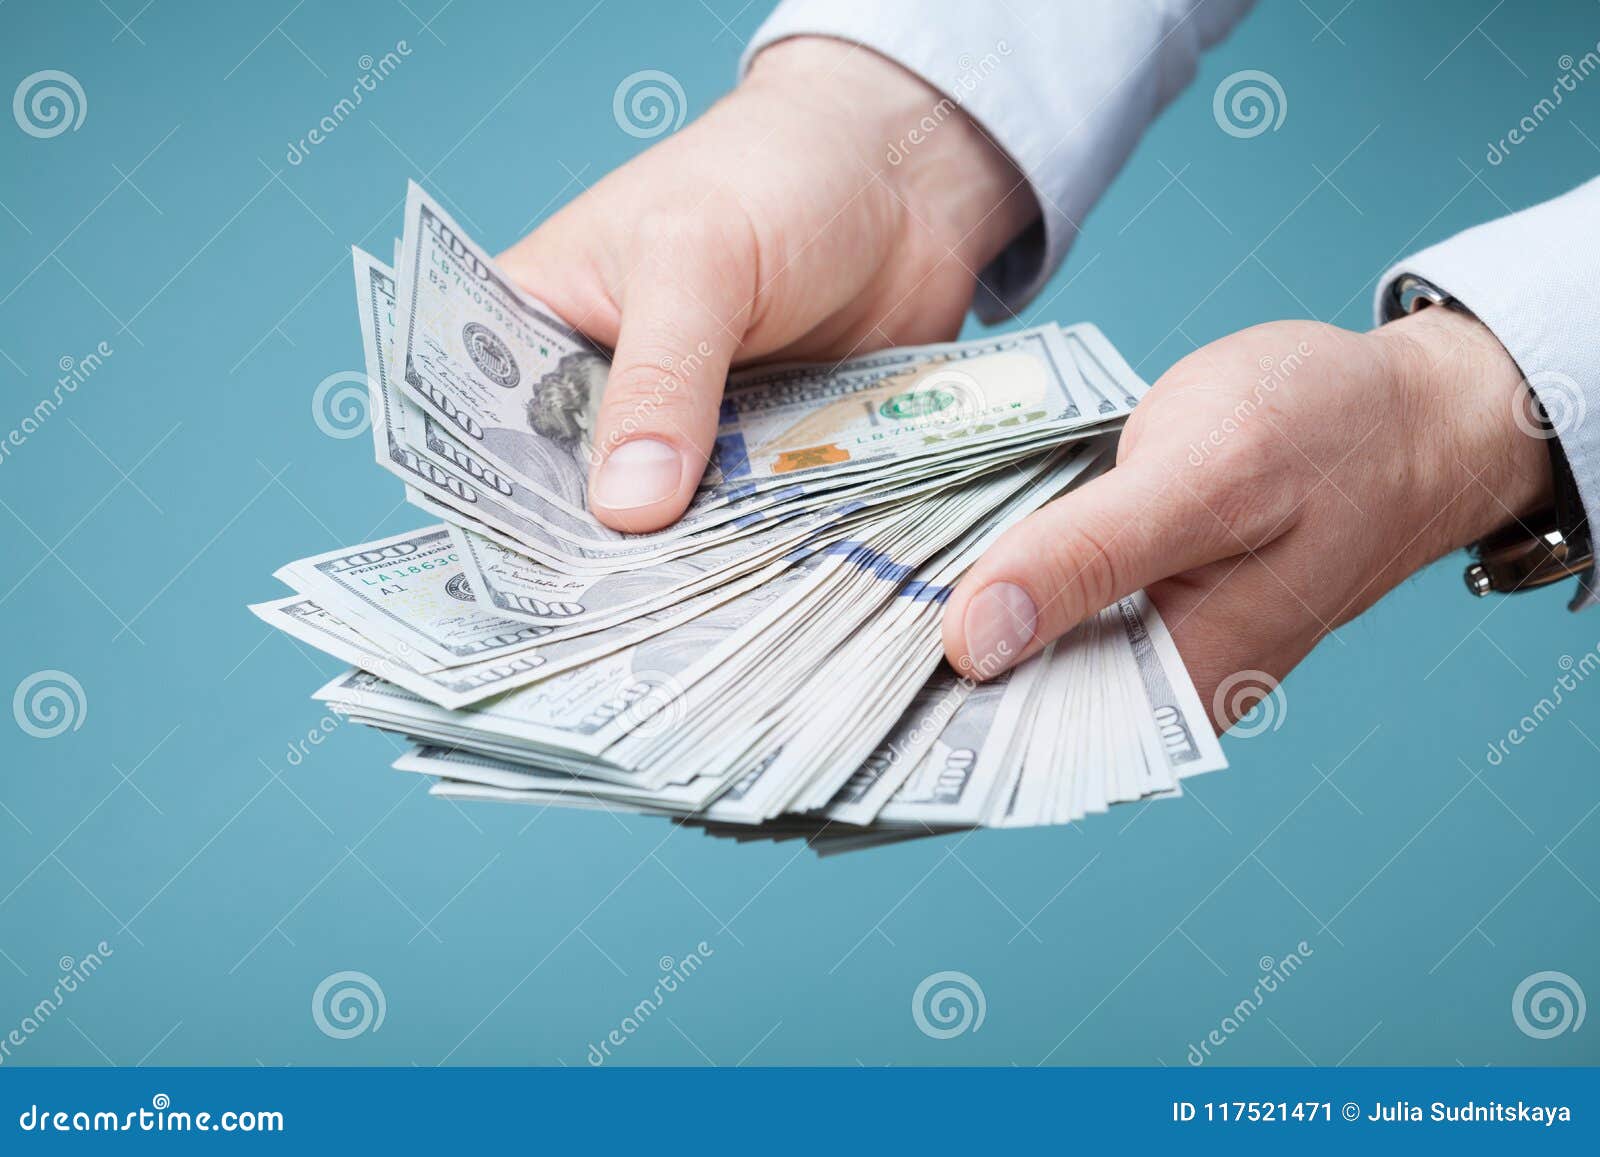 man count money cash in his hand. finance, saving, salary and donate concept.